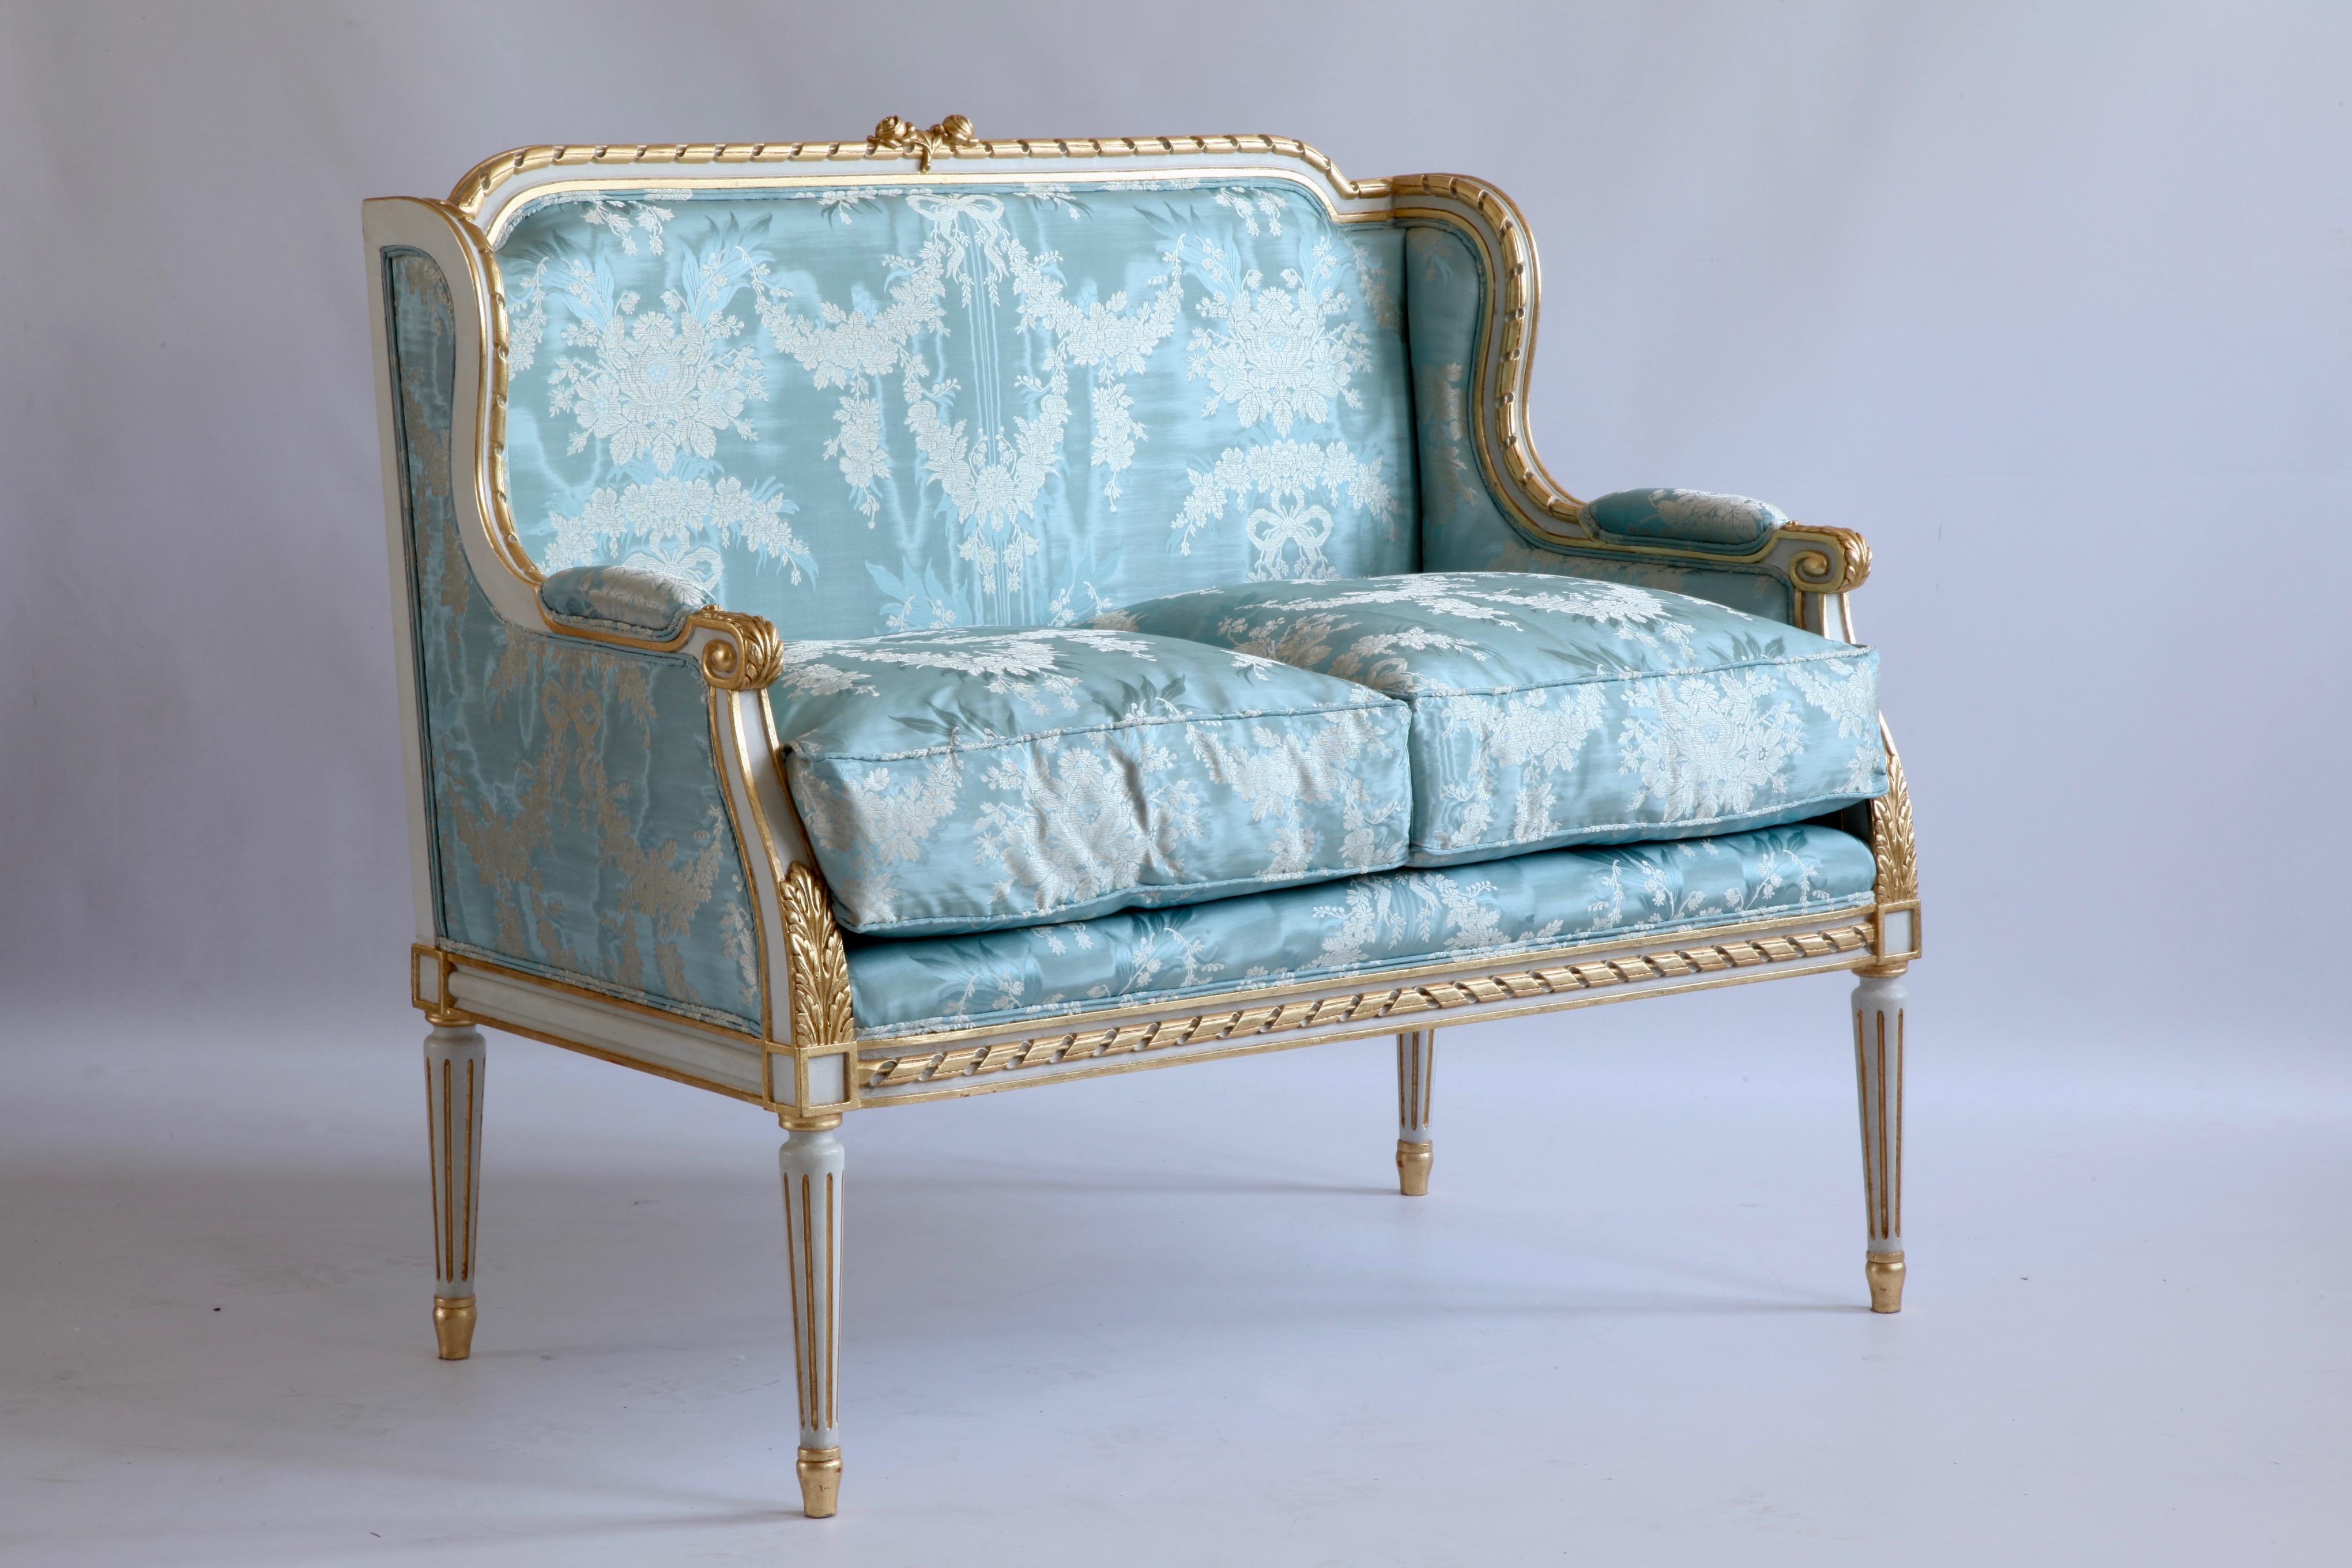 Louis XVI style canape made by La Maison London.
Hand carved in solid wood, painted in an ecru white with gold highlights.
Upholstered in a fabric of your choice 
Please note: 11m of fabric is required, this is not included in the price. We Have a